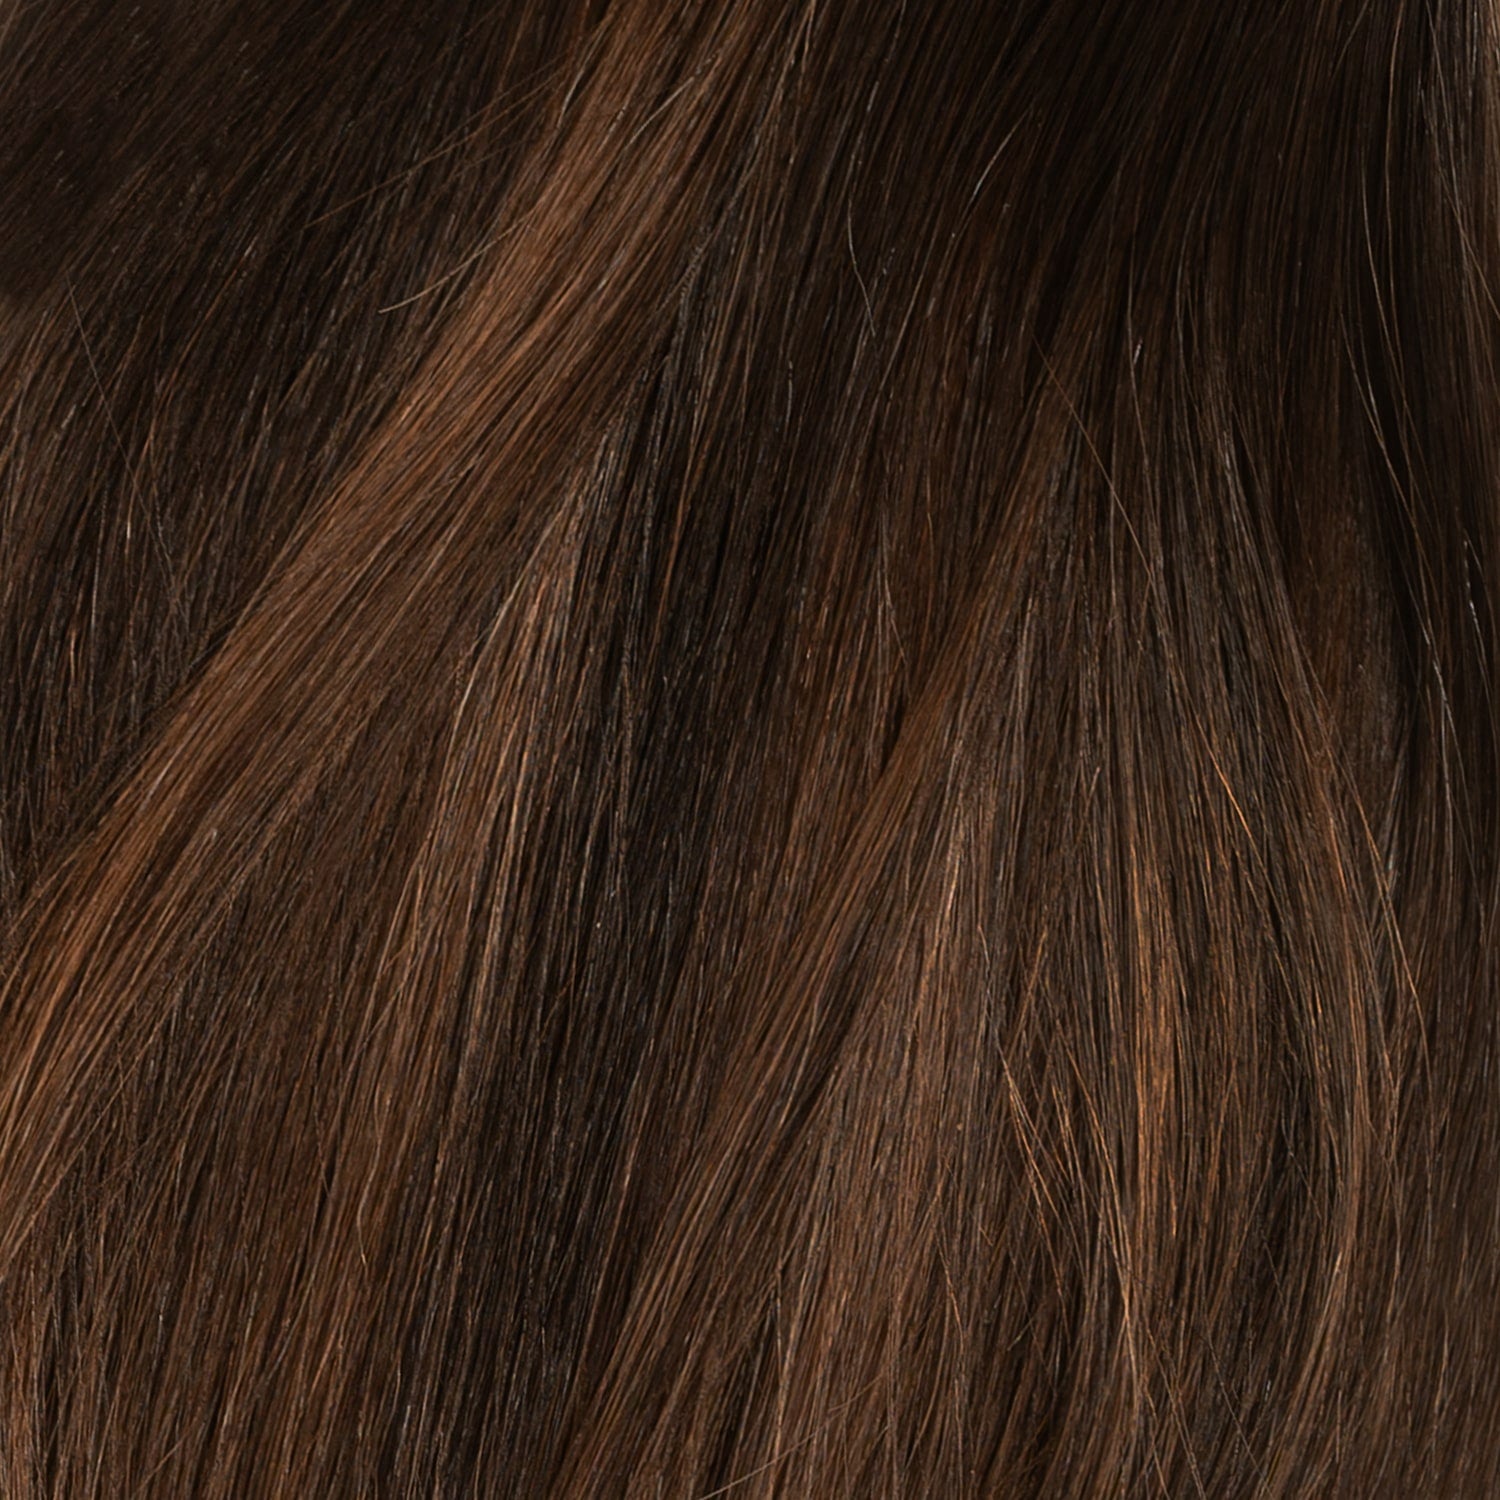 Invisible weft - Dark Chocolate Brown Balayage 1A+4